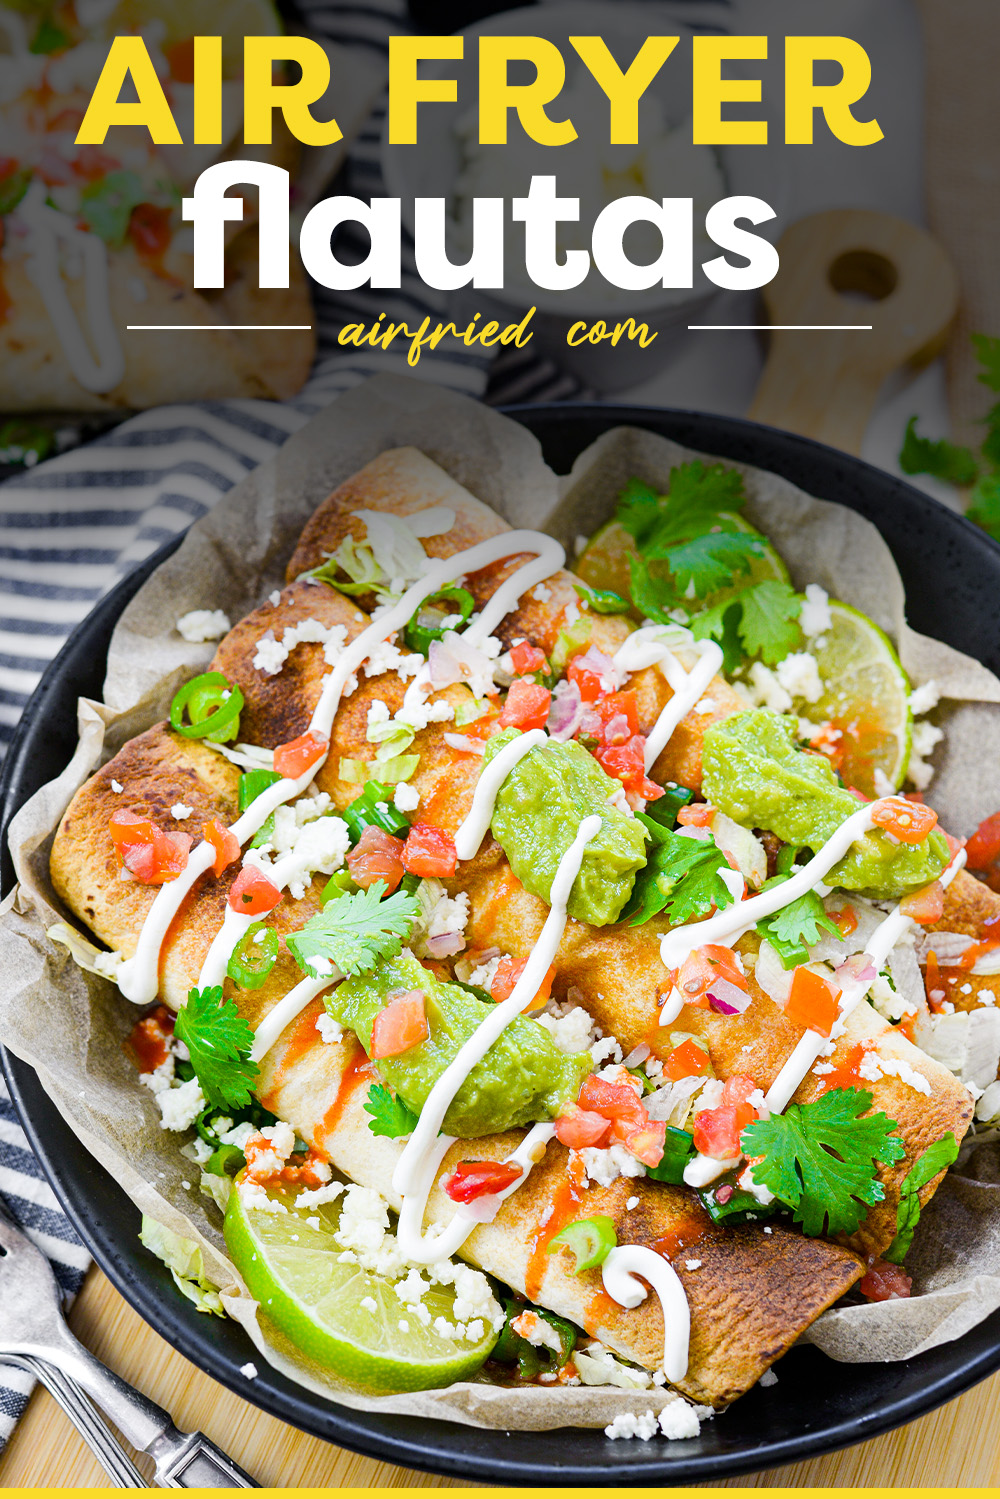 These air fryer chicken flautas makes them crispy, flavorful, and so good looking!  